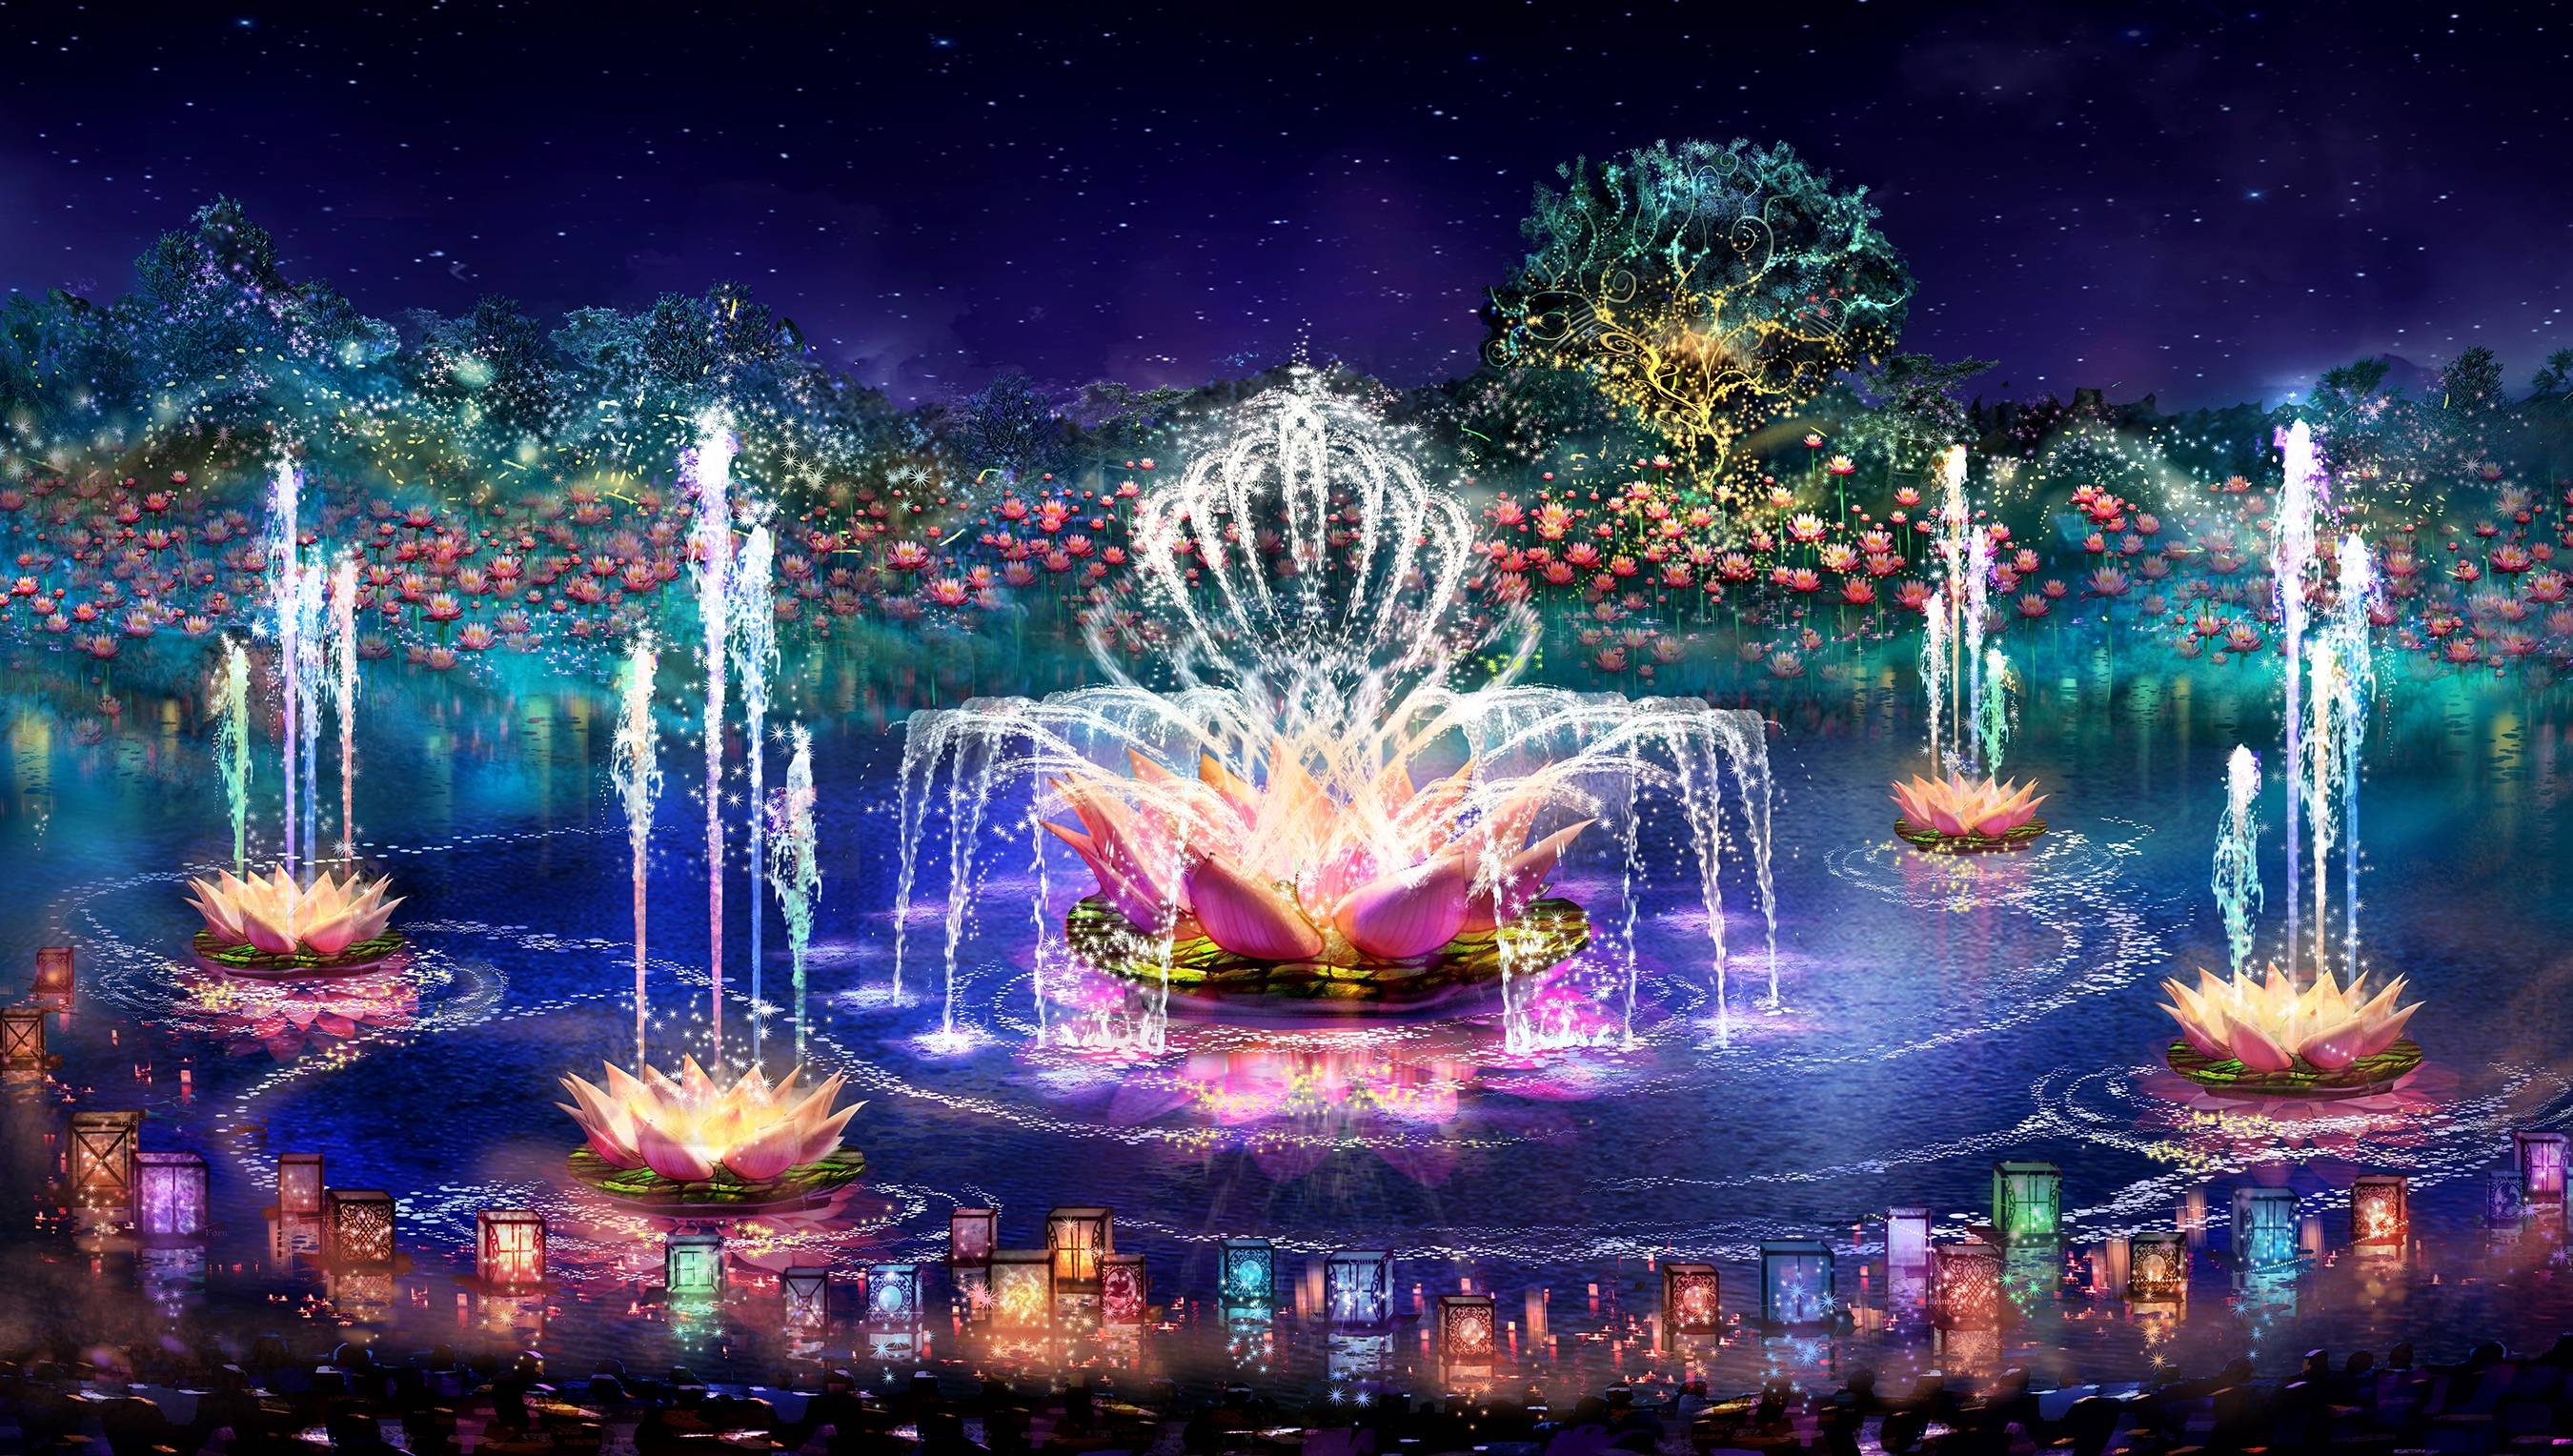 VIDEO - Disney posts Rivers of Light chat with creative team